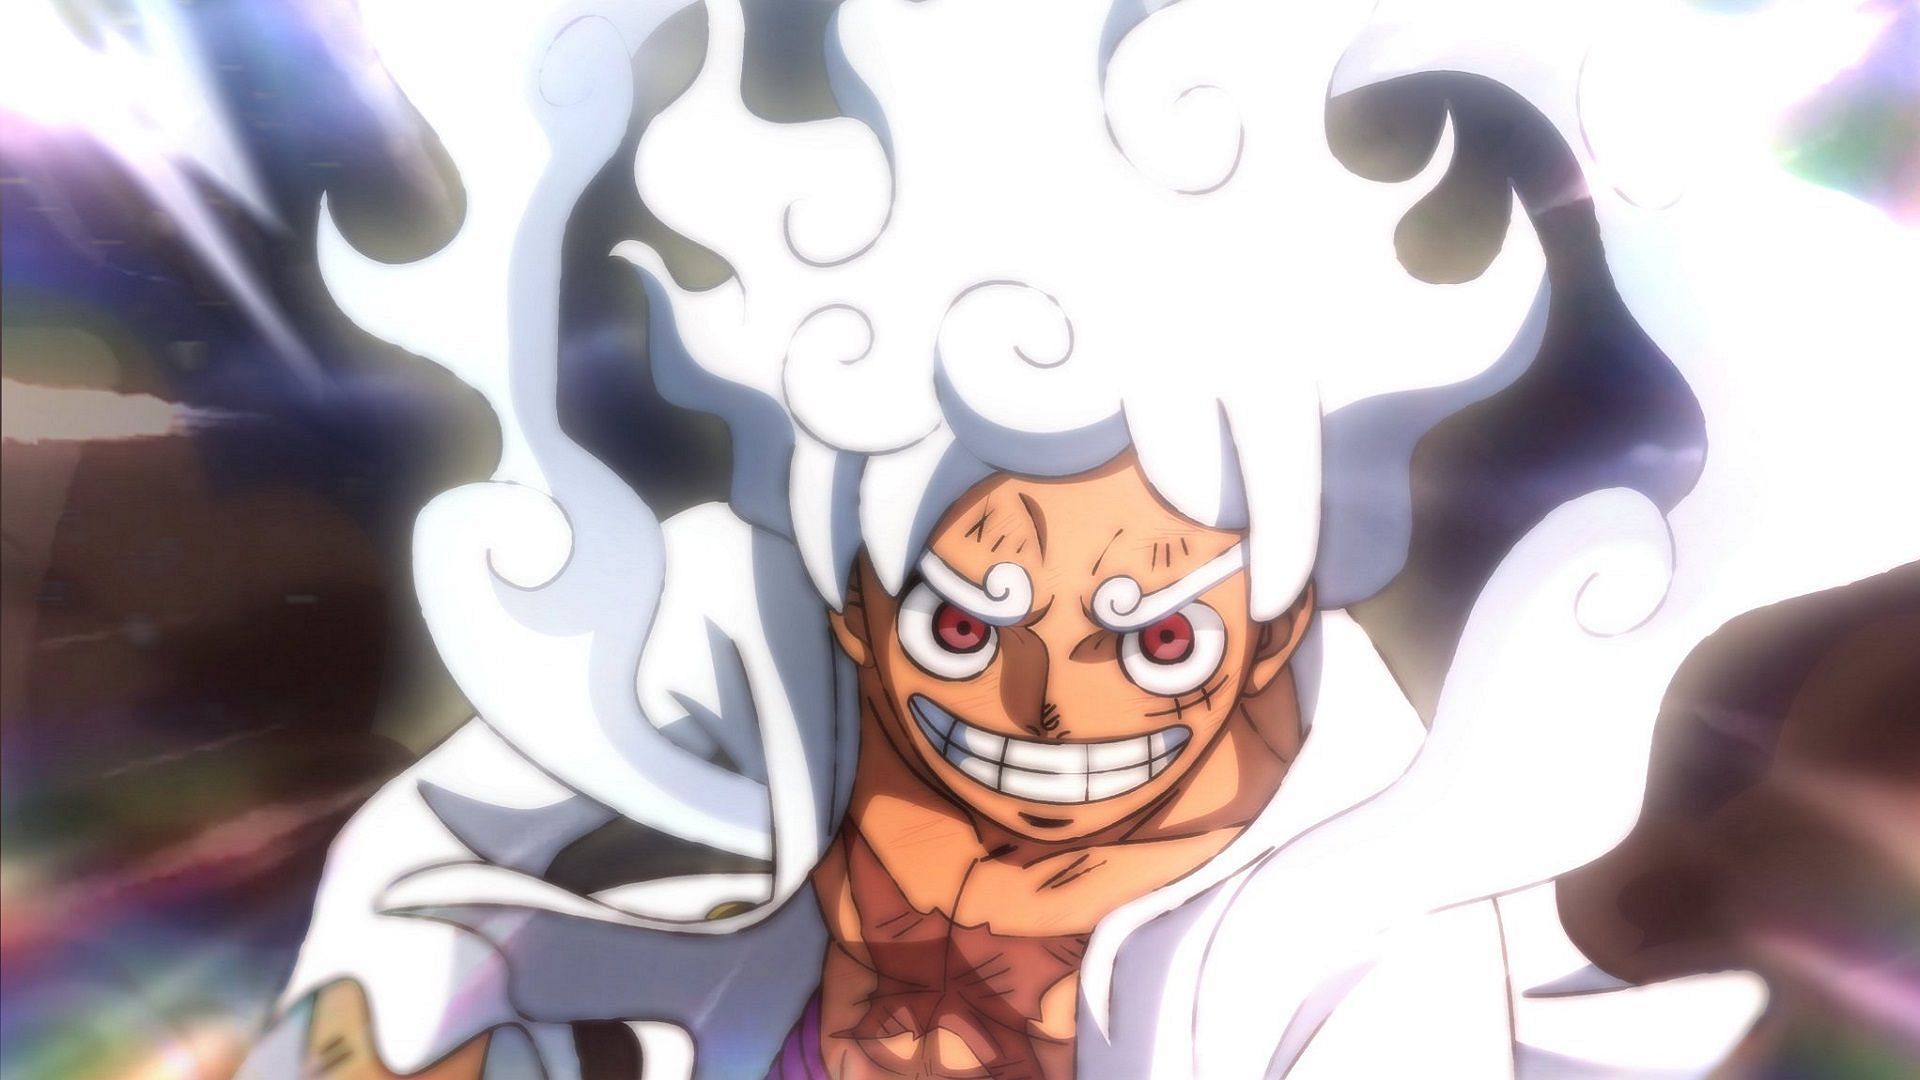 One Piece': Gear 5 Arrives Next Week, and the Hype Is off the Charts